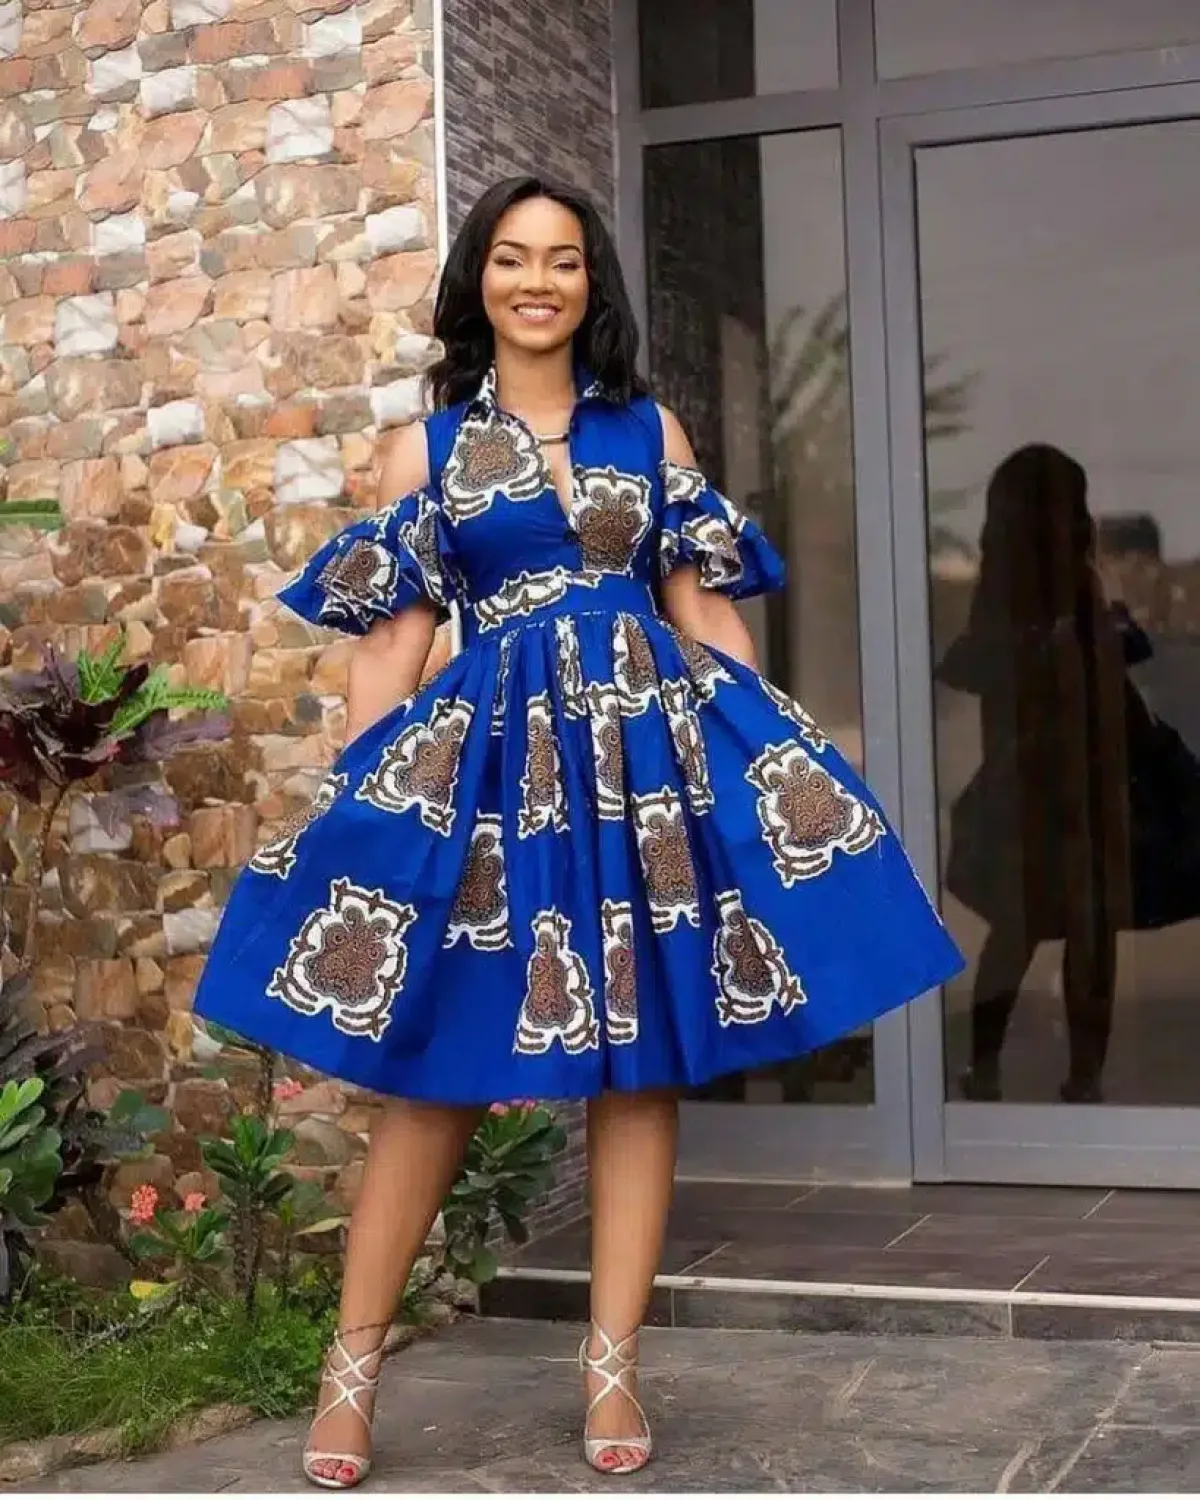 4 Irresistible African dress styles in 2023 and where to find them